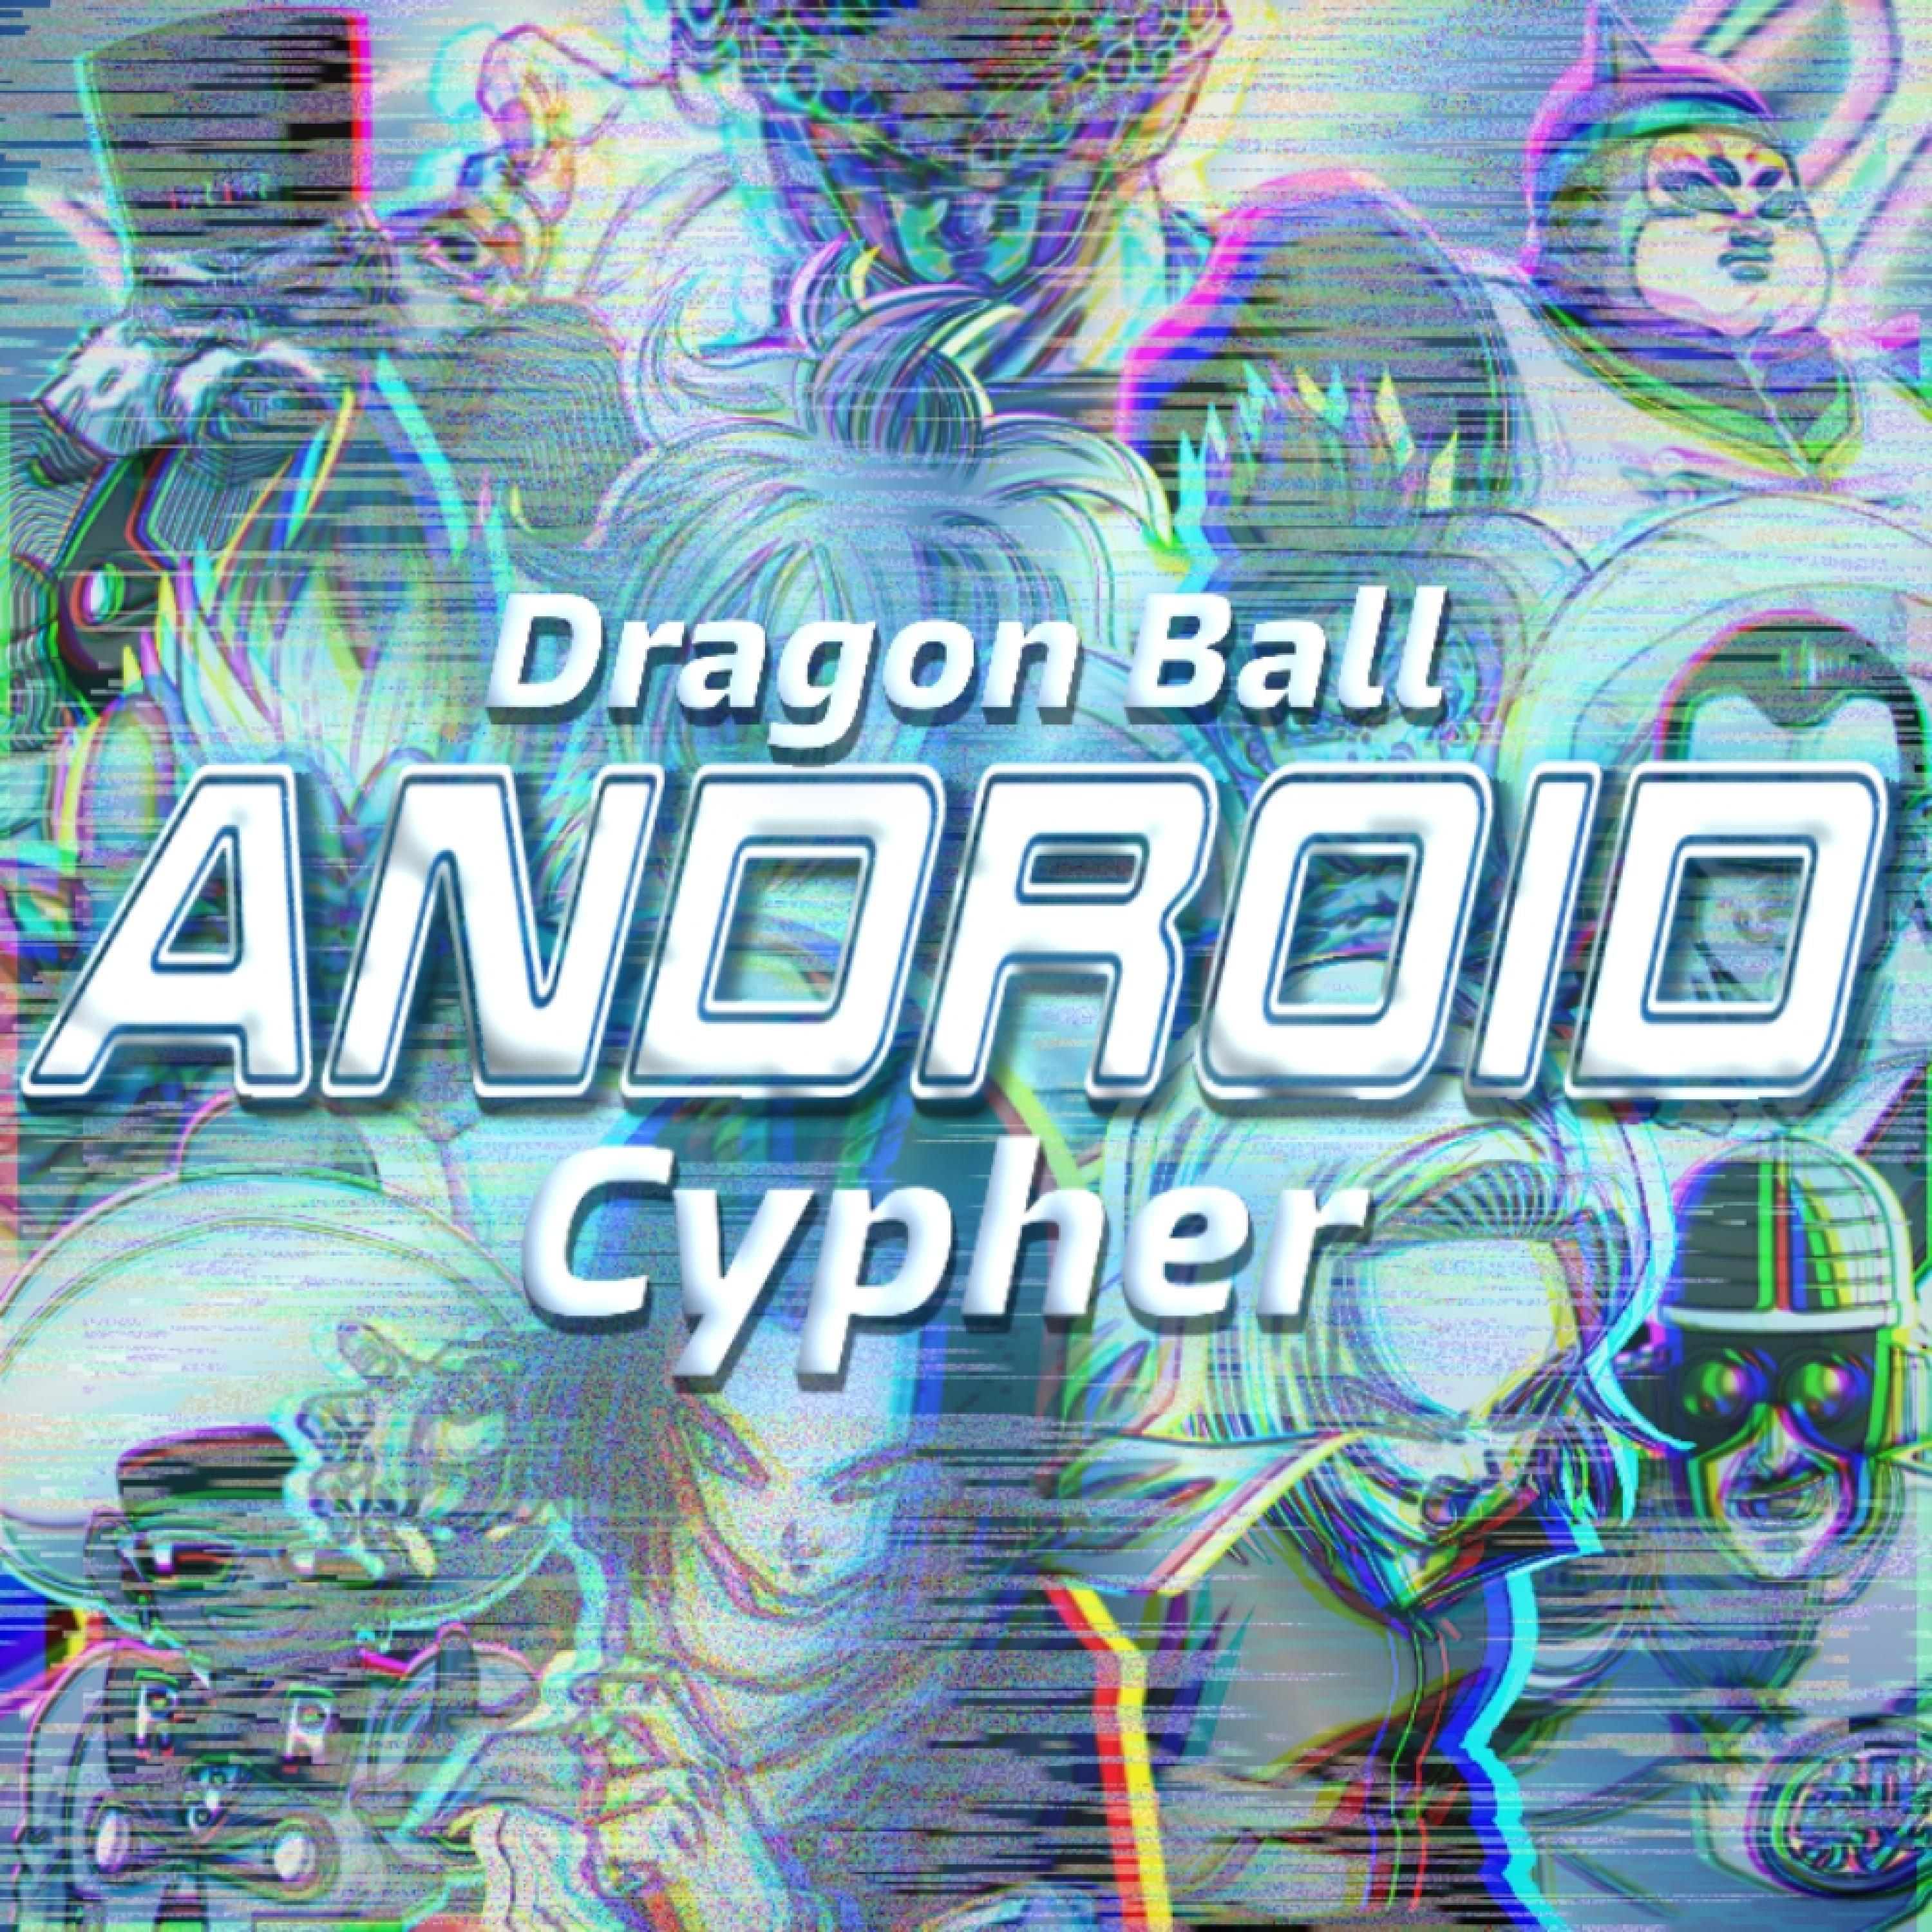 GhostChildX - Android Cypher (feat. Knight of Breath, Jixplosion, KBN Chrollo, Volcar-OHNO, Steel Twlvs, Tasteless Mage, J Cae, Bassed Olaf, Thorn Together, TrayeFreezy & KaziKage)